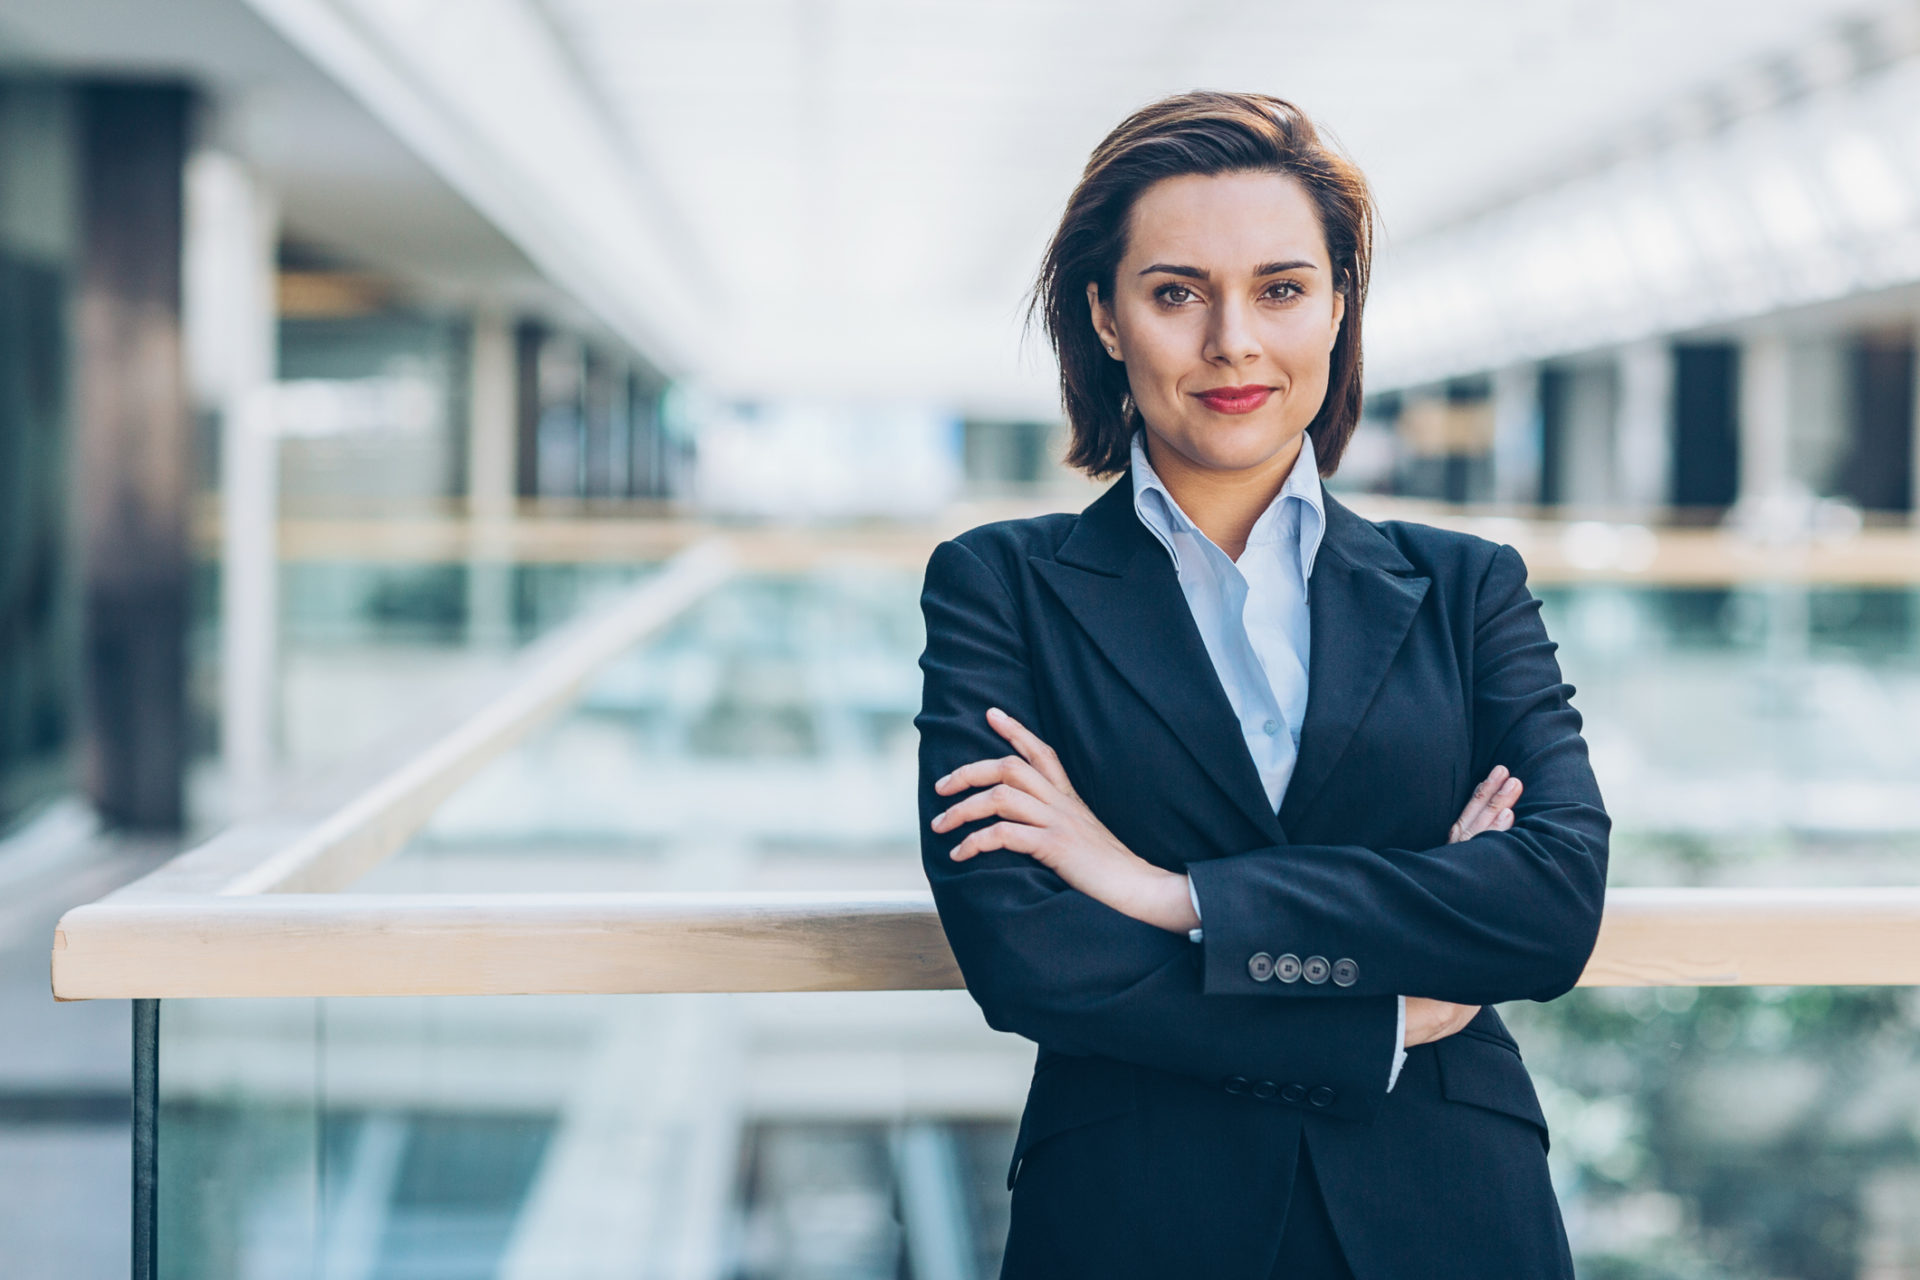 Young woman in business wear standing with armes crossed in business environment